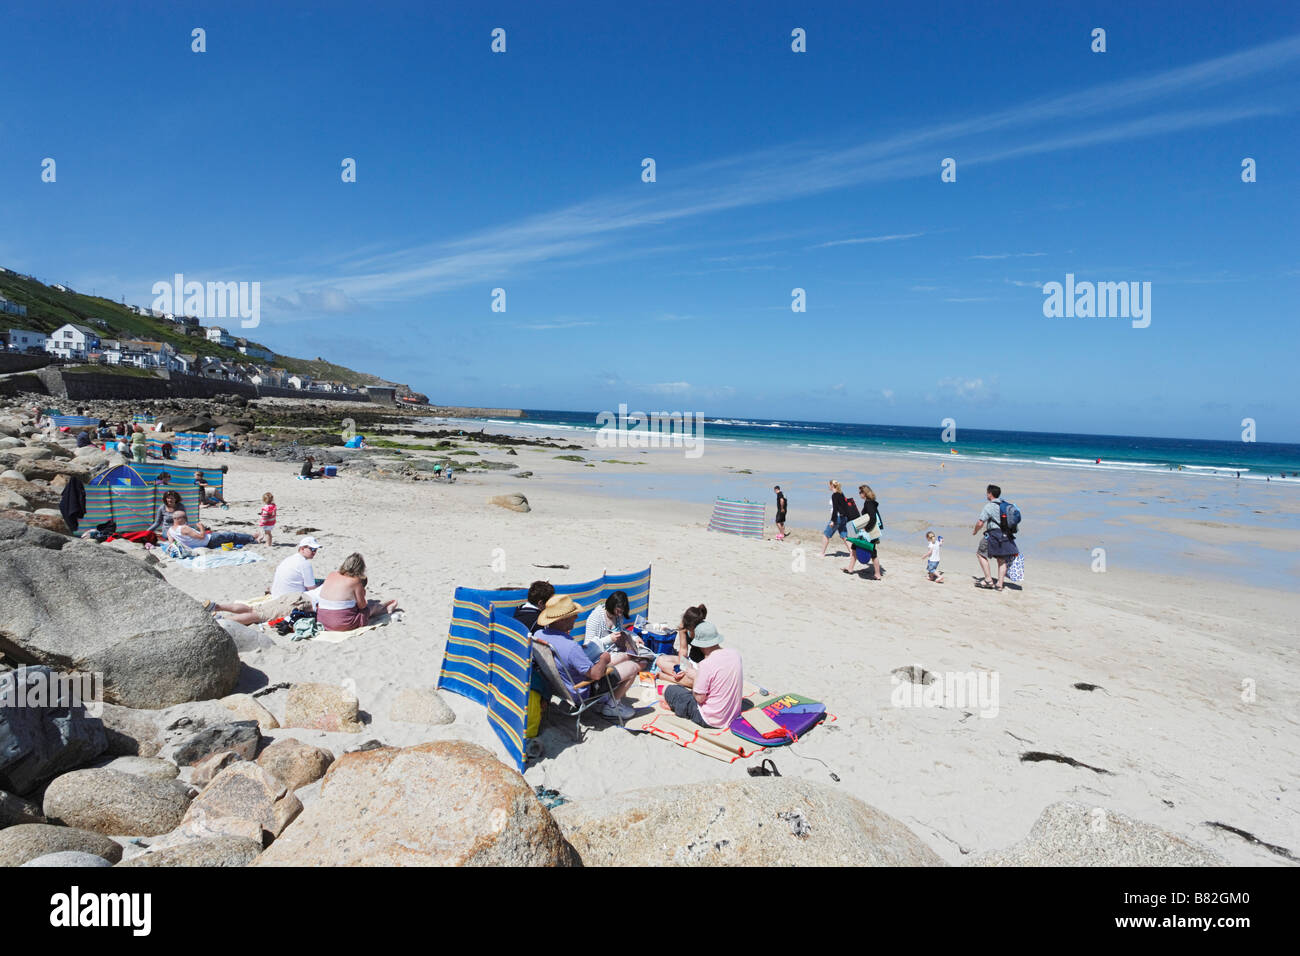 People relaxing at Sennen Cove Penwith peninsula Cornwall England United Kingdom Stock Photo